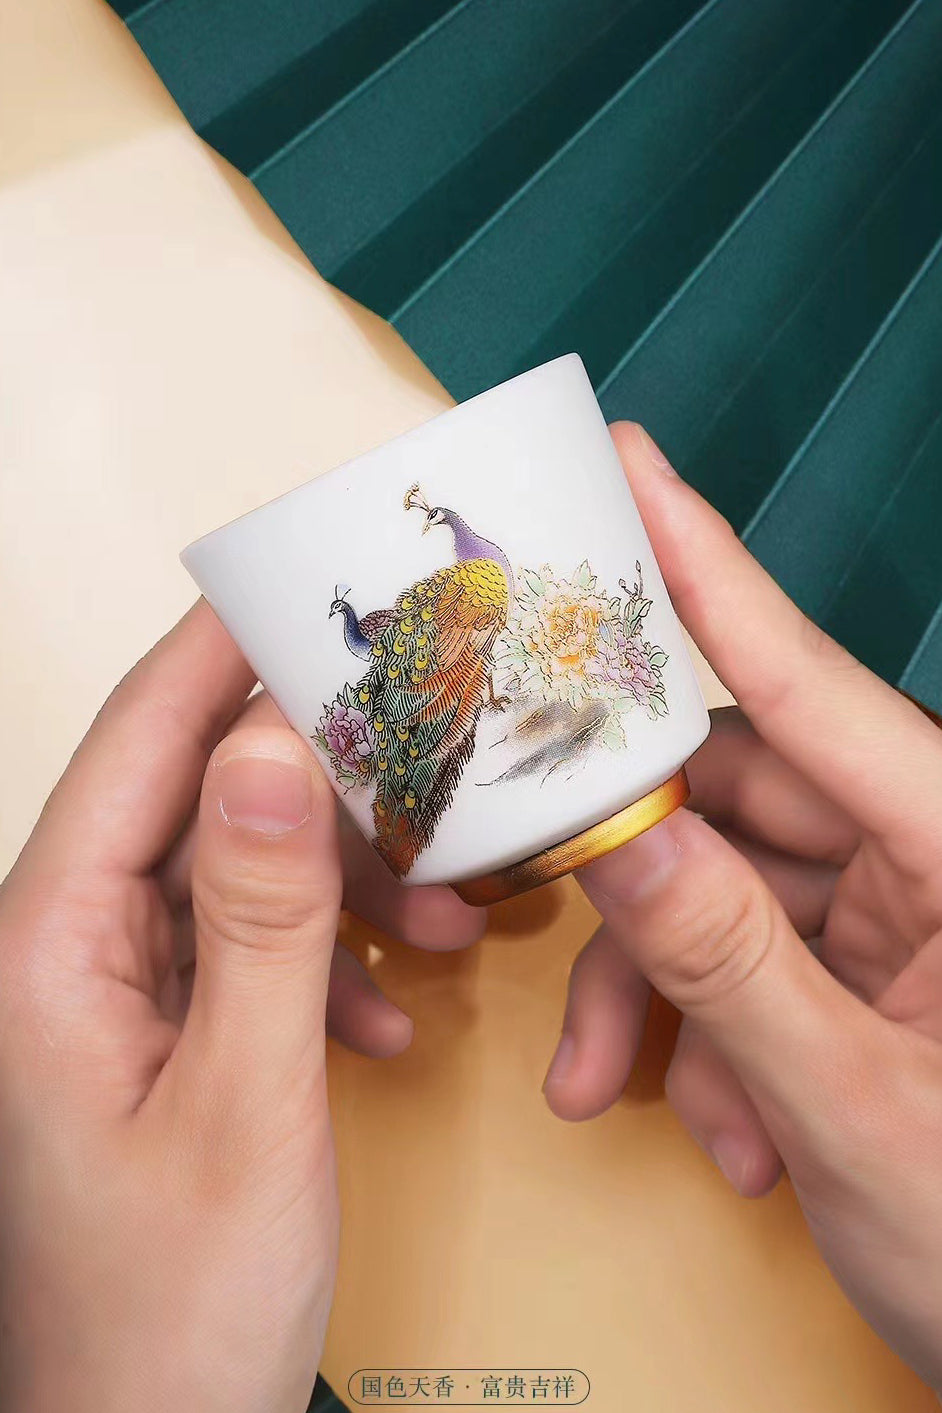 Chinese Vintage Peacock Gongfu Teacup Gorgeous Porcelain|Best Ceramics